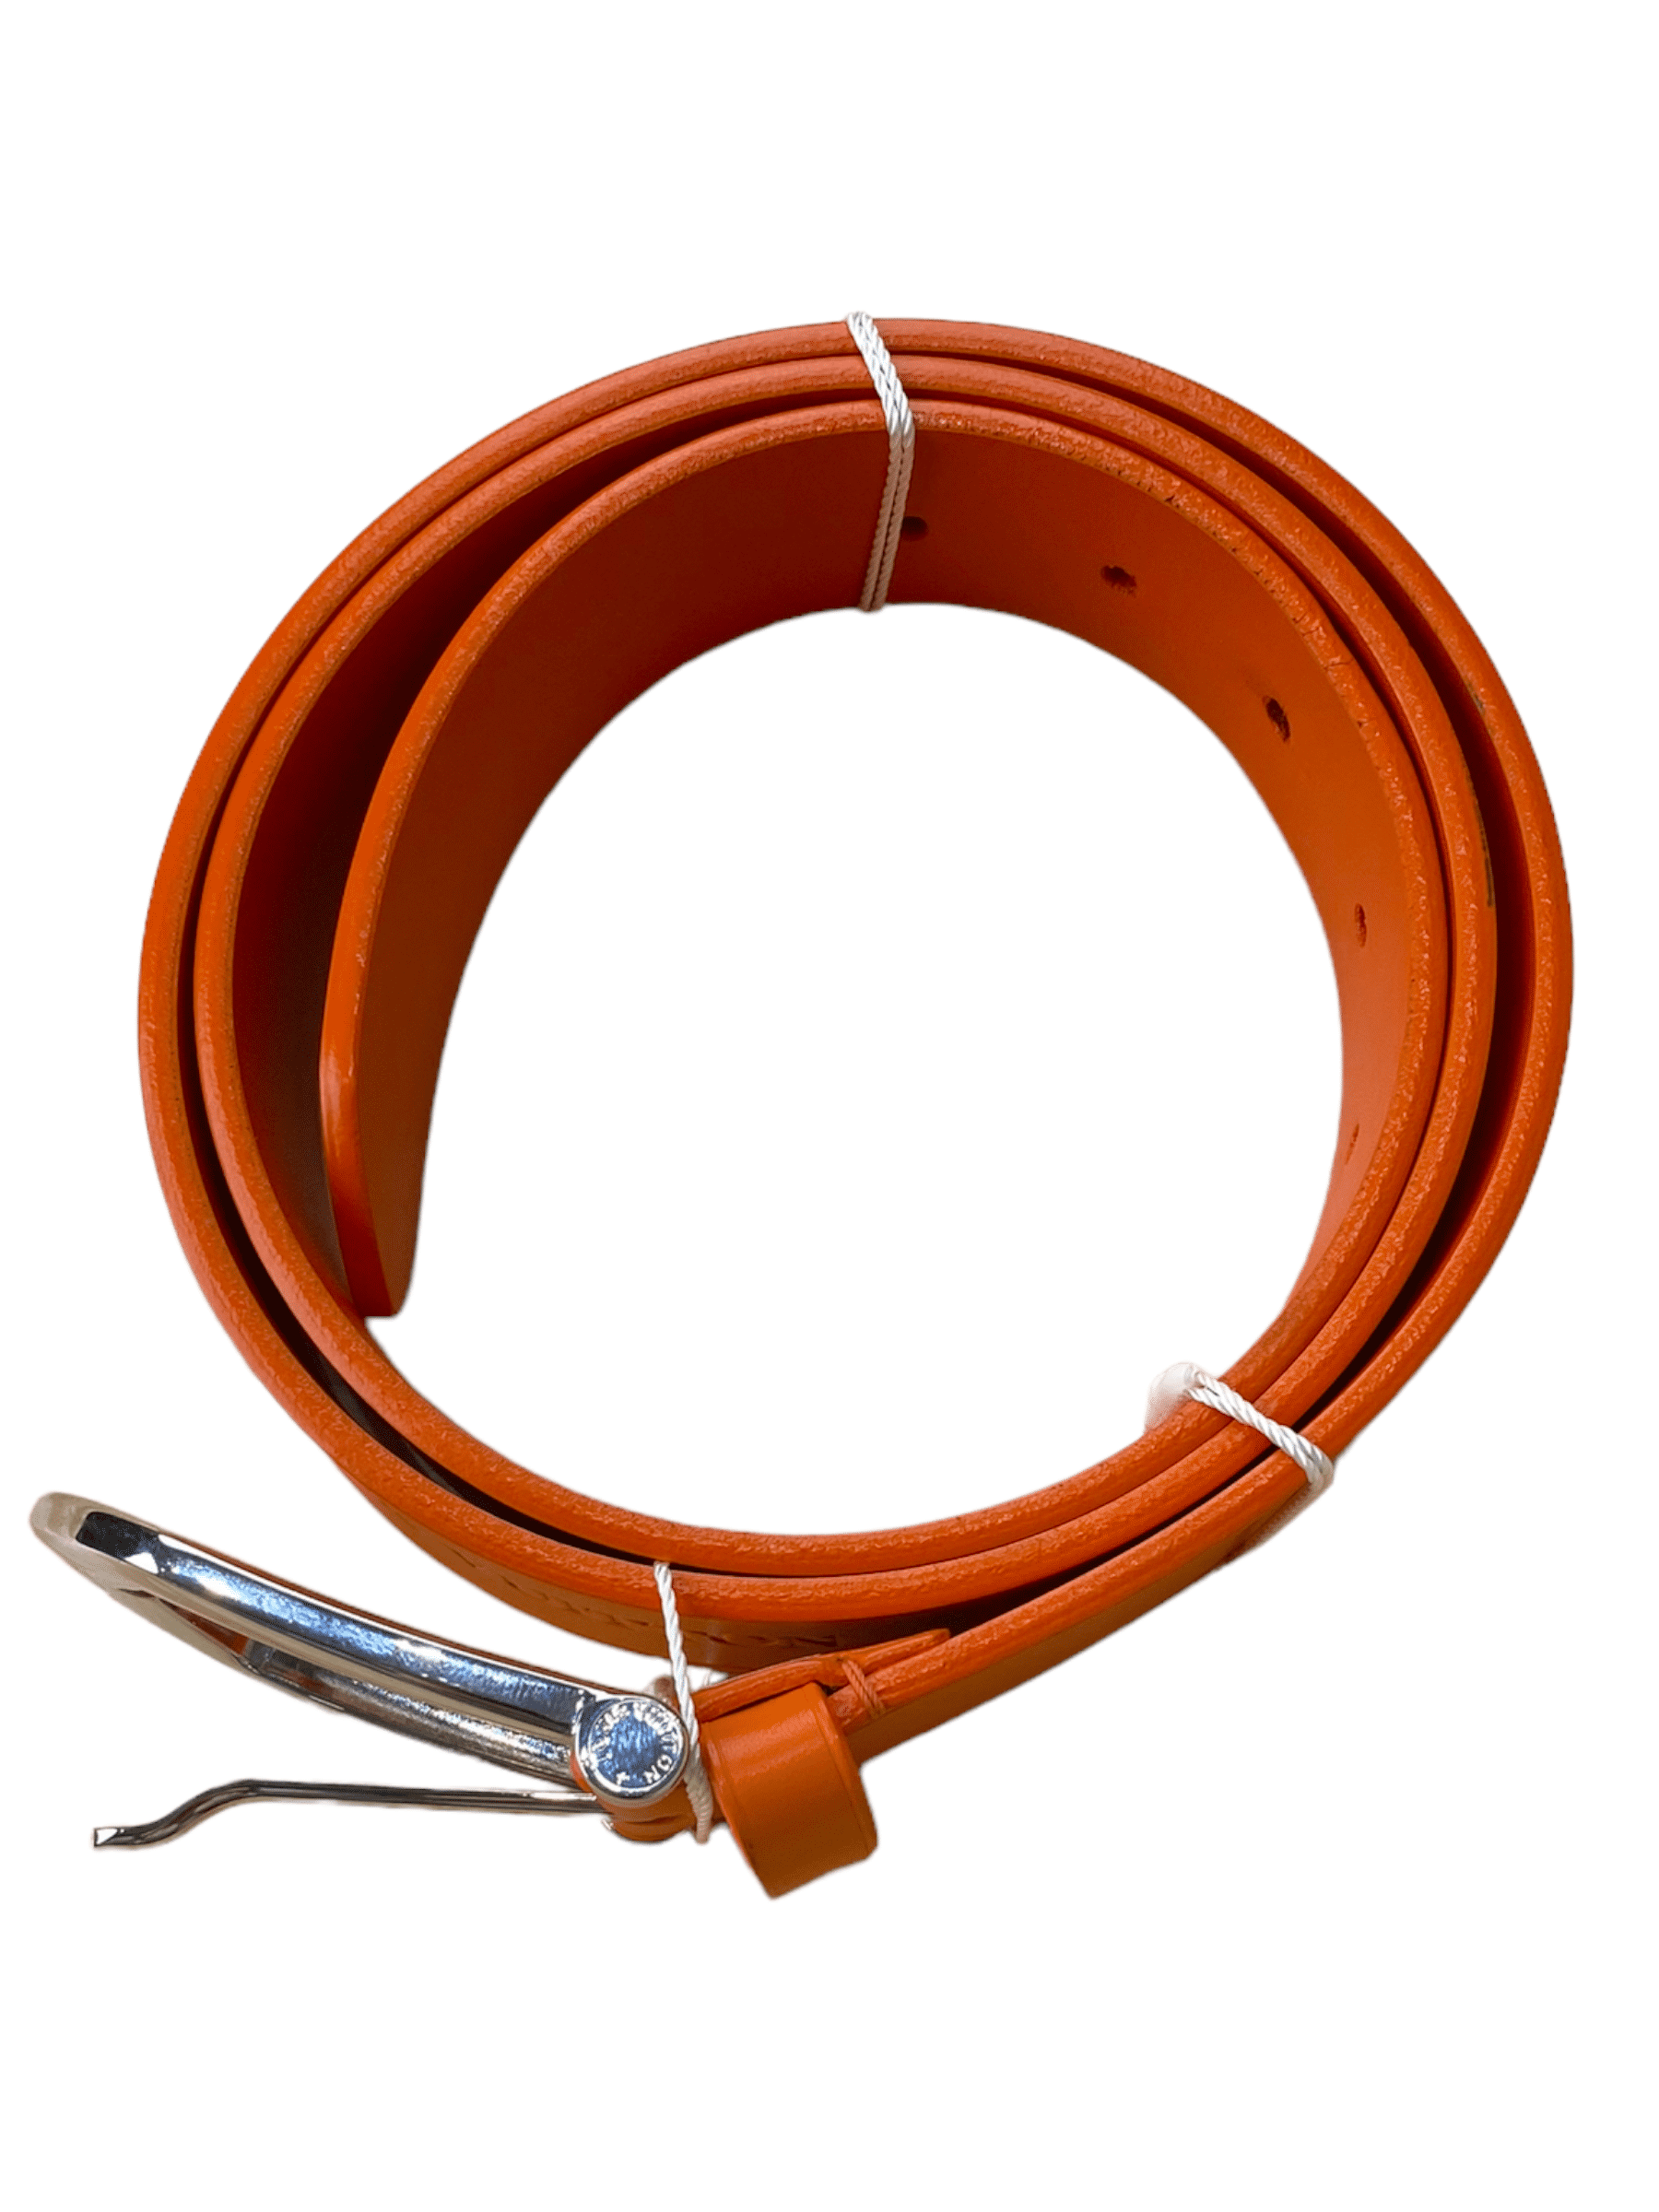 Louis Vuitton Orange Leather Belt Size 34 — Genuine Design Luxury Consignment for Men. New & Pre-Owned Clothing, Shoes, & Accessories. Calgary, Canada